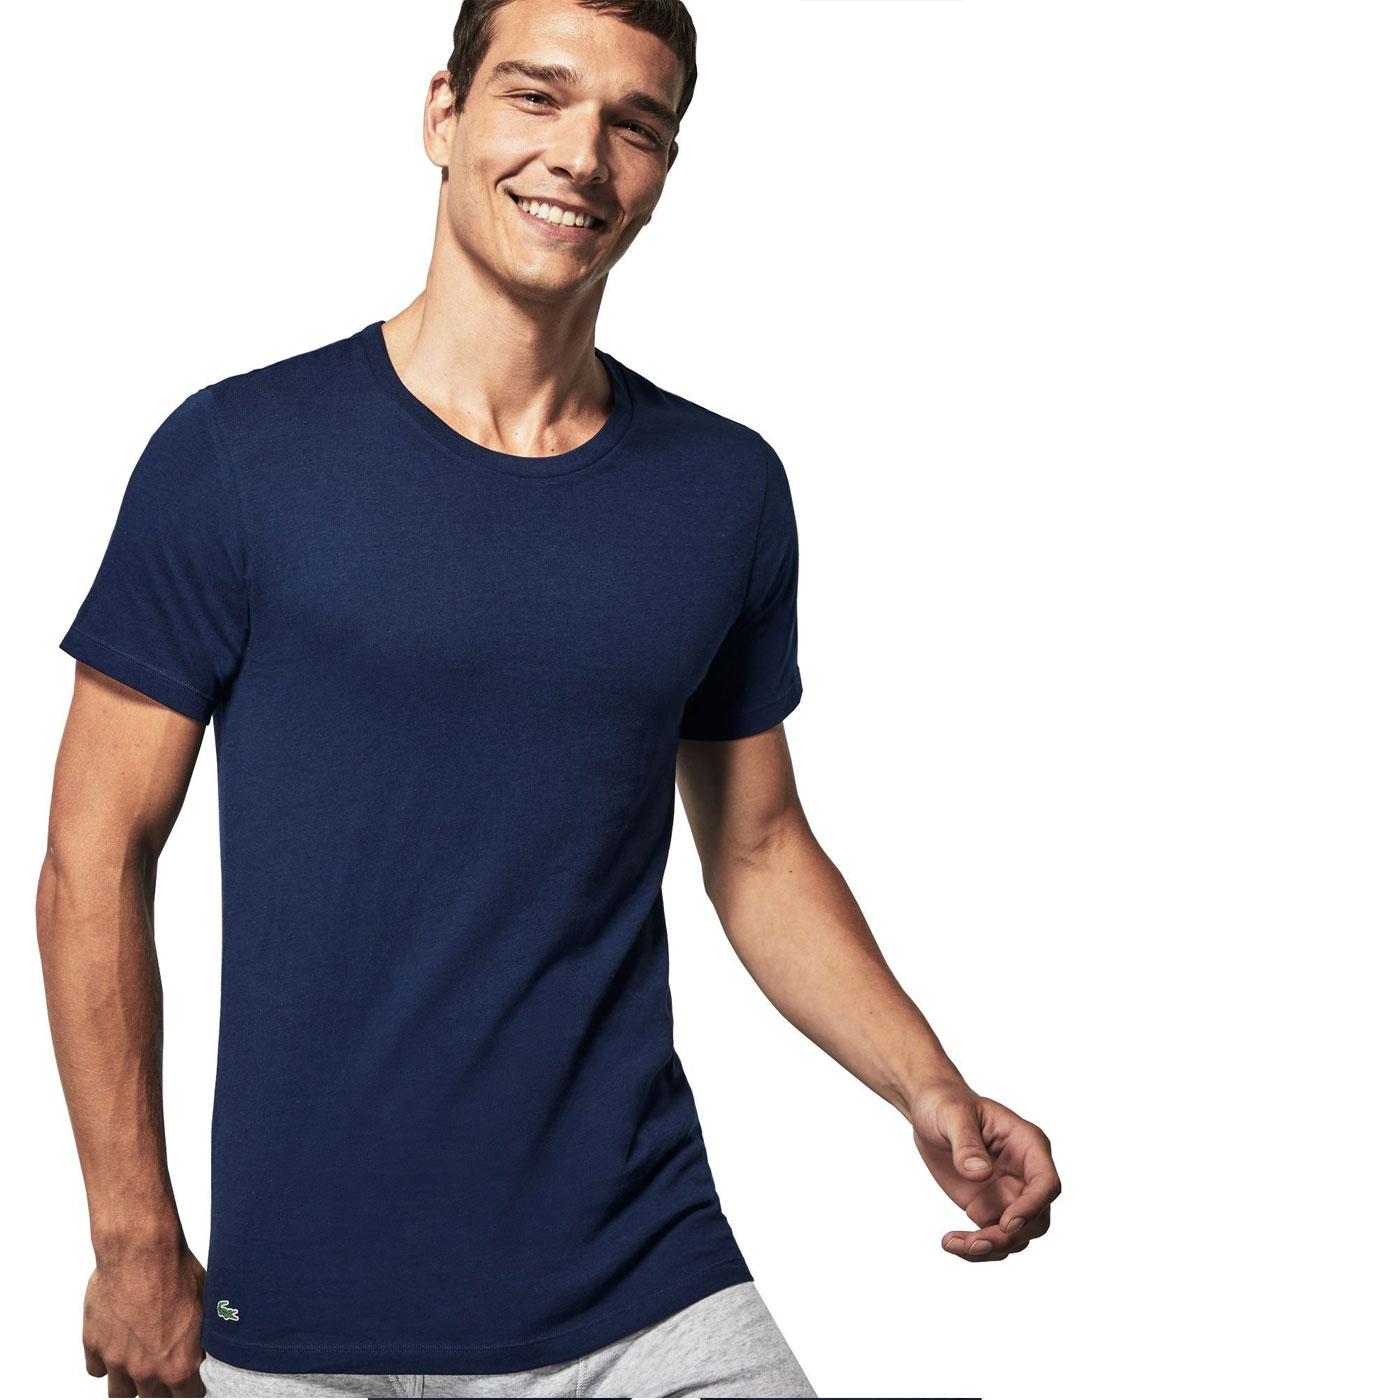 LACOSTE Men's 3 Pack Crew Neck T-Shirts in Blue Multi